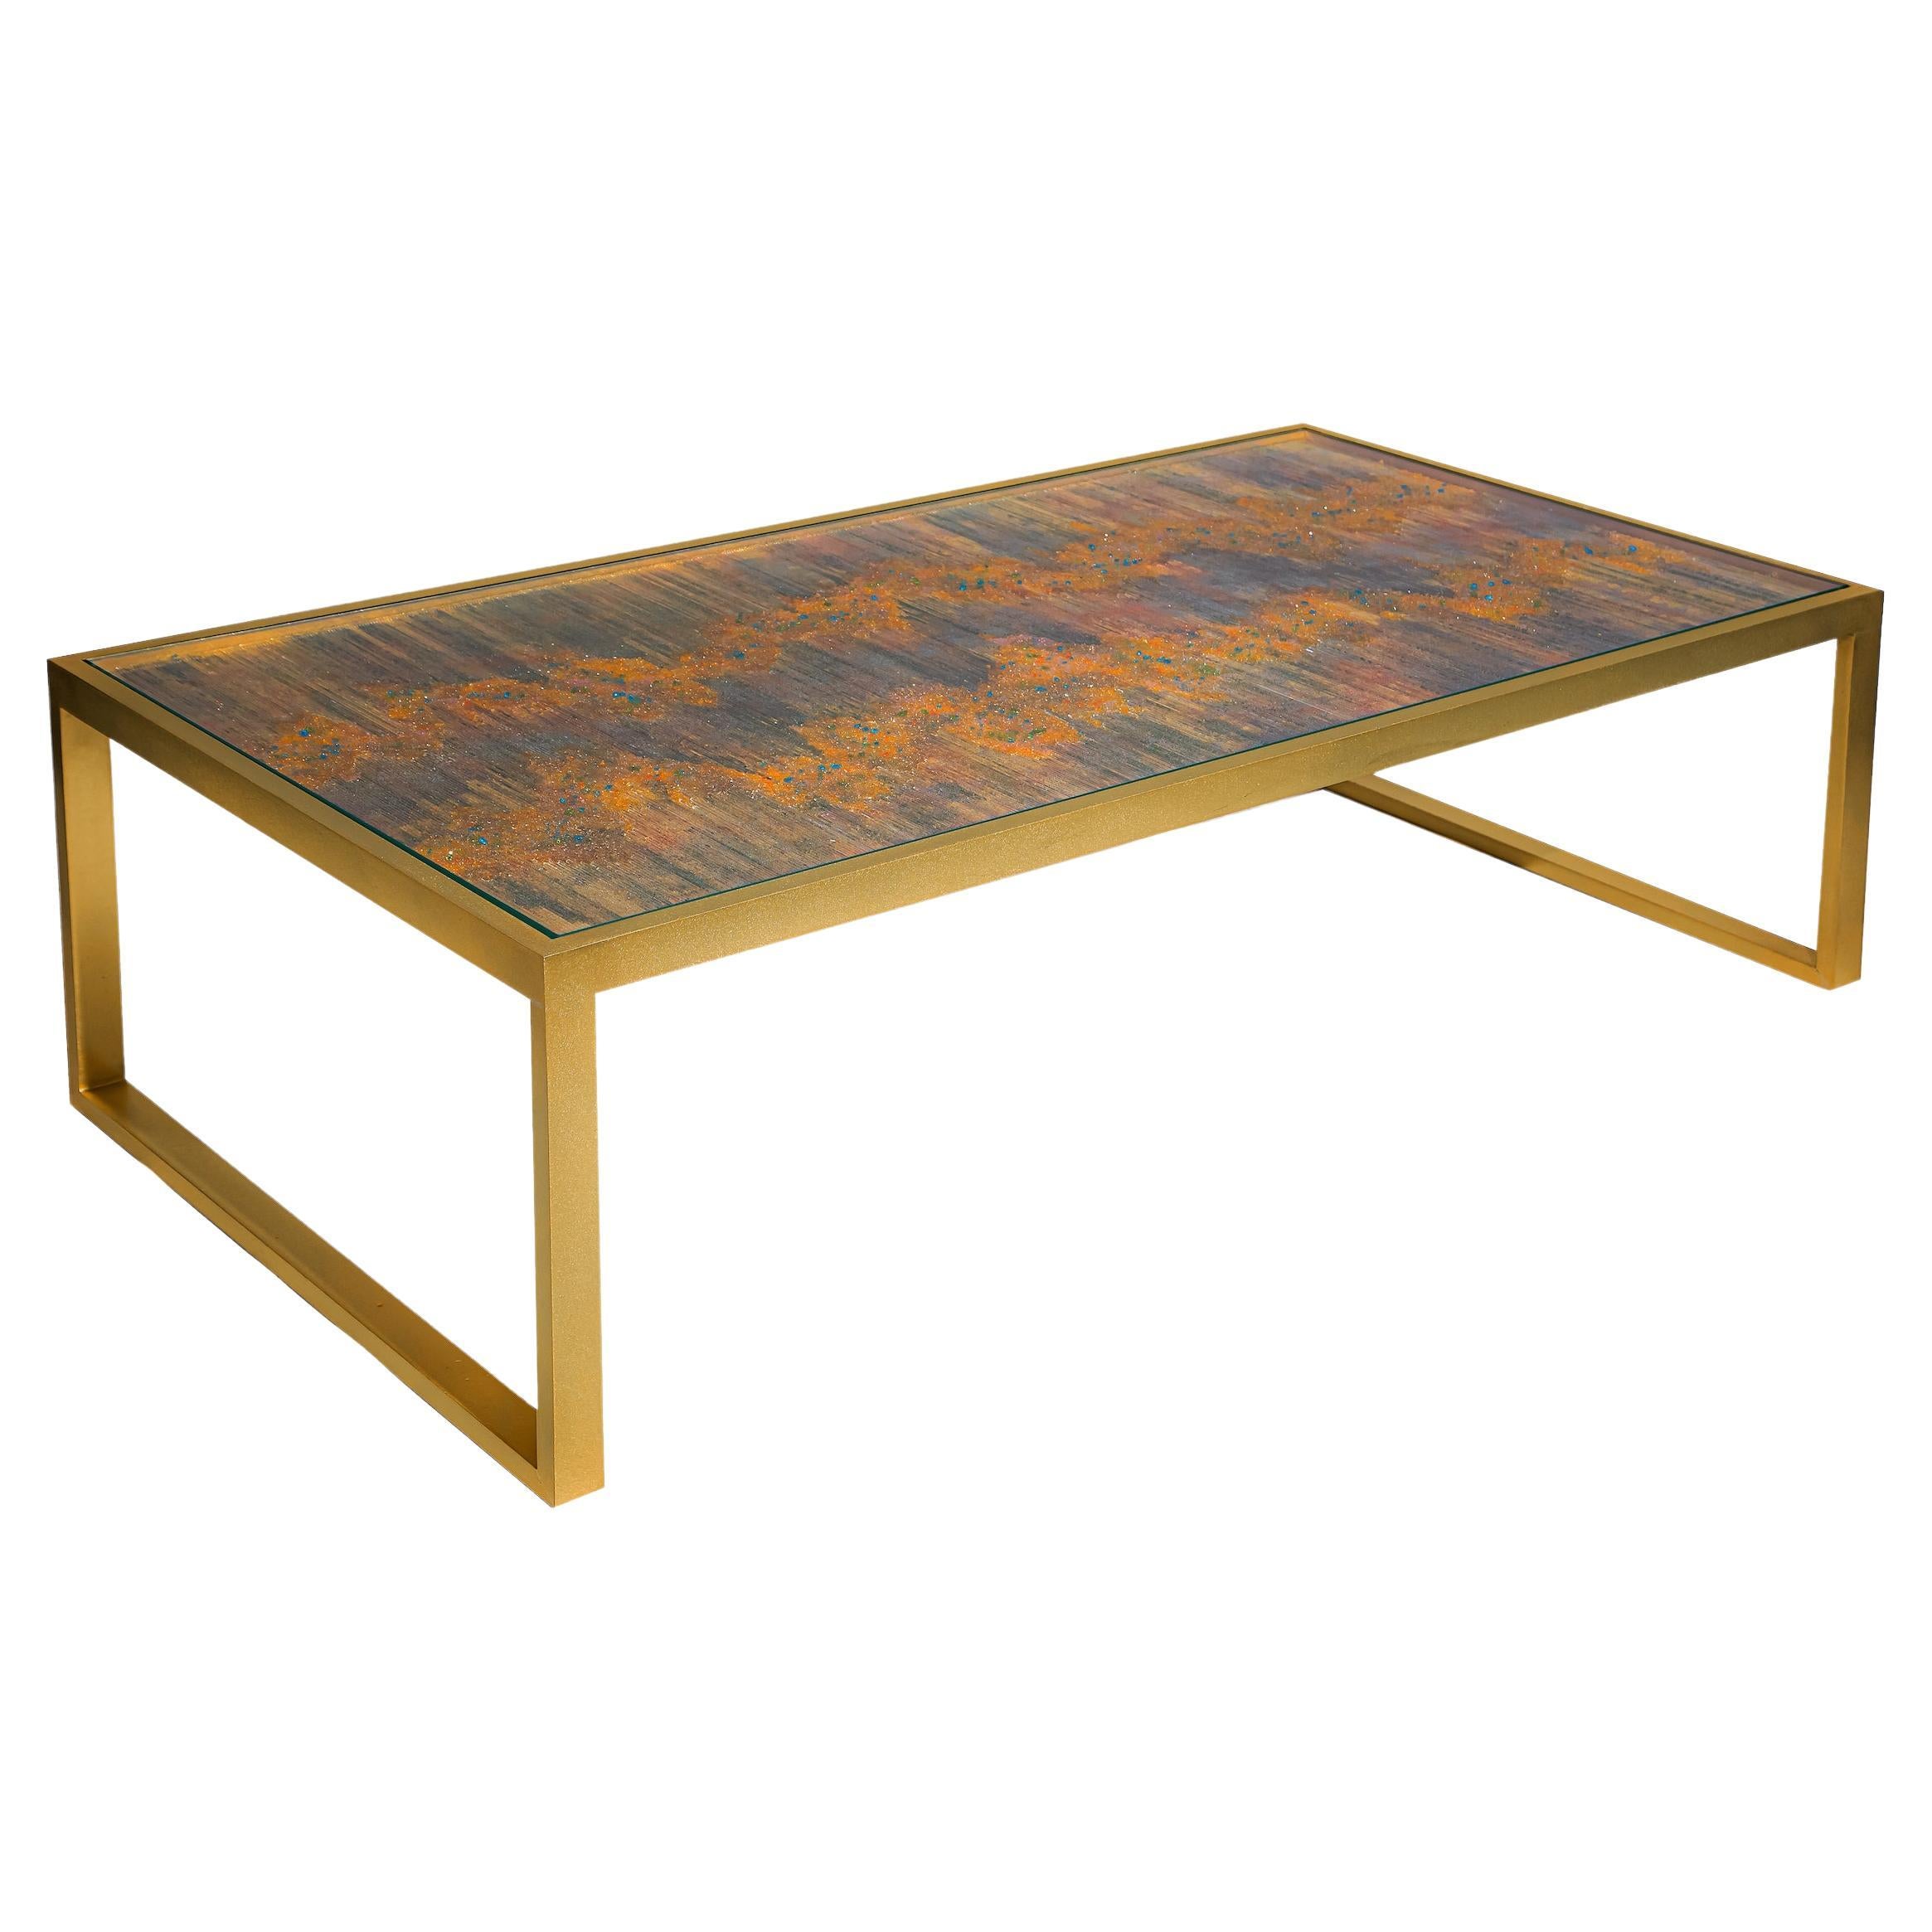 "Aurora" One-Of-A-Kind Glass Topped Coffee Table Satin Finish Brass Base